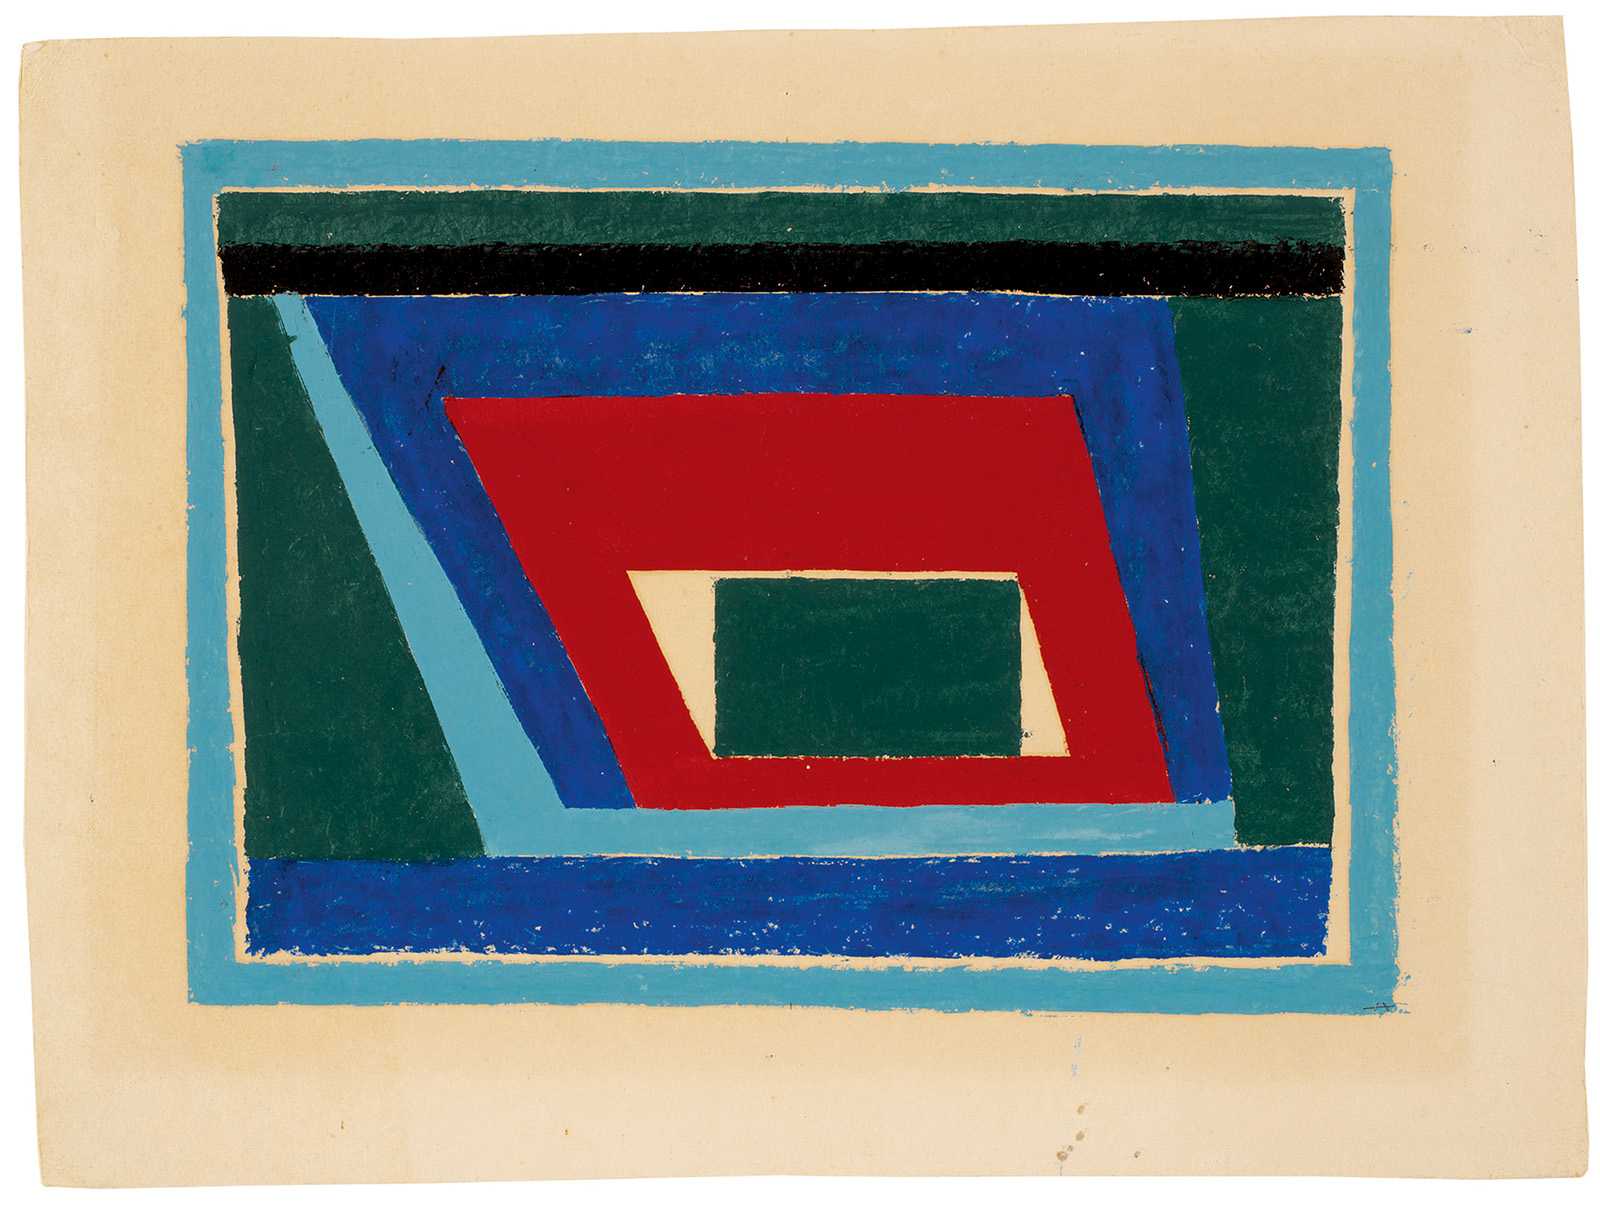 Josef Albers, Untitled abstraction (Mantic), ca. 1940